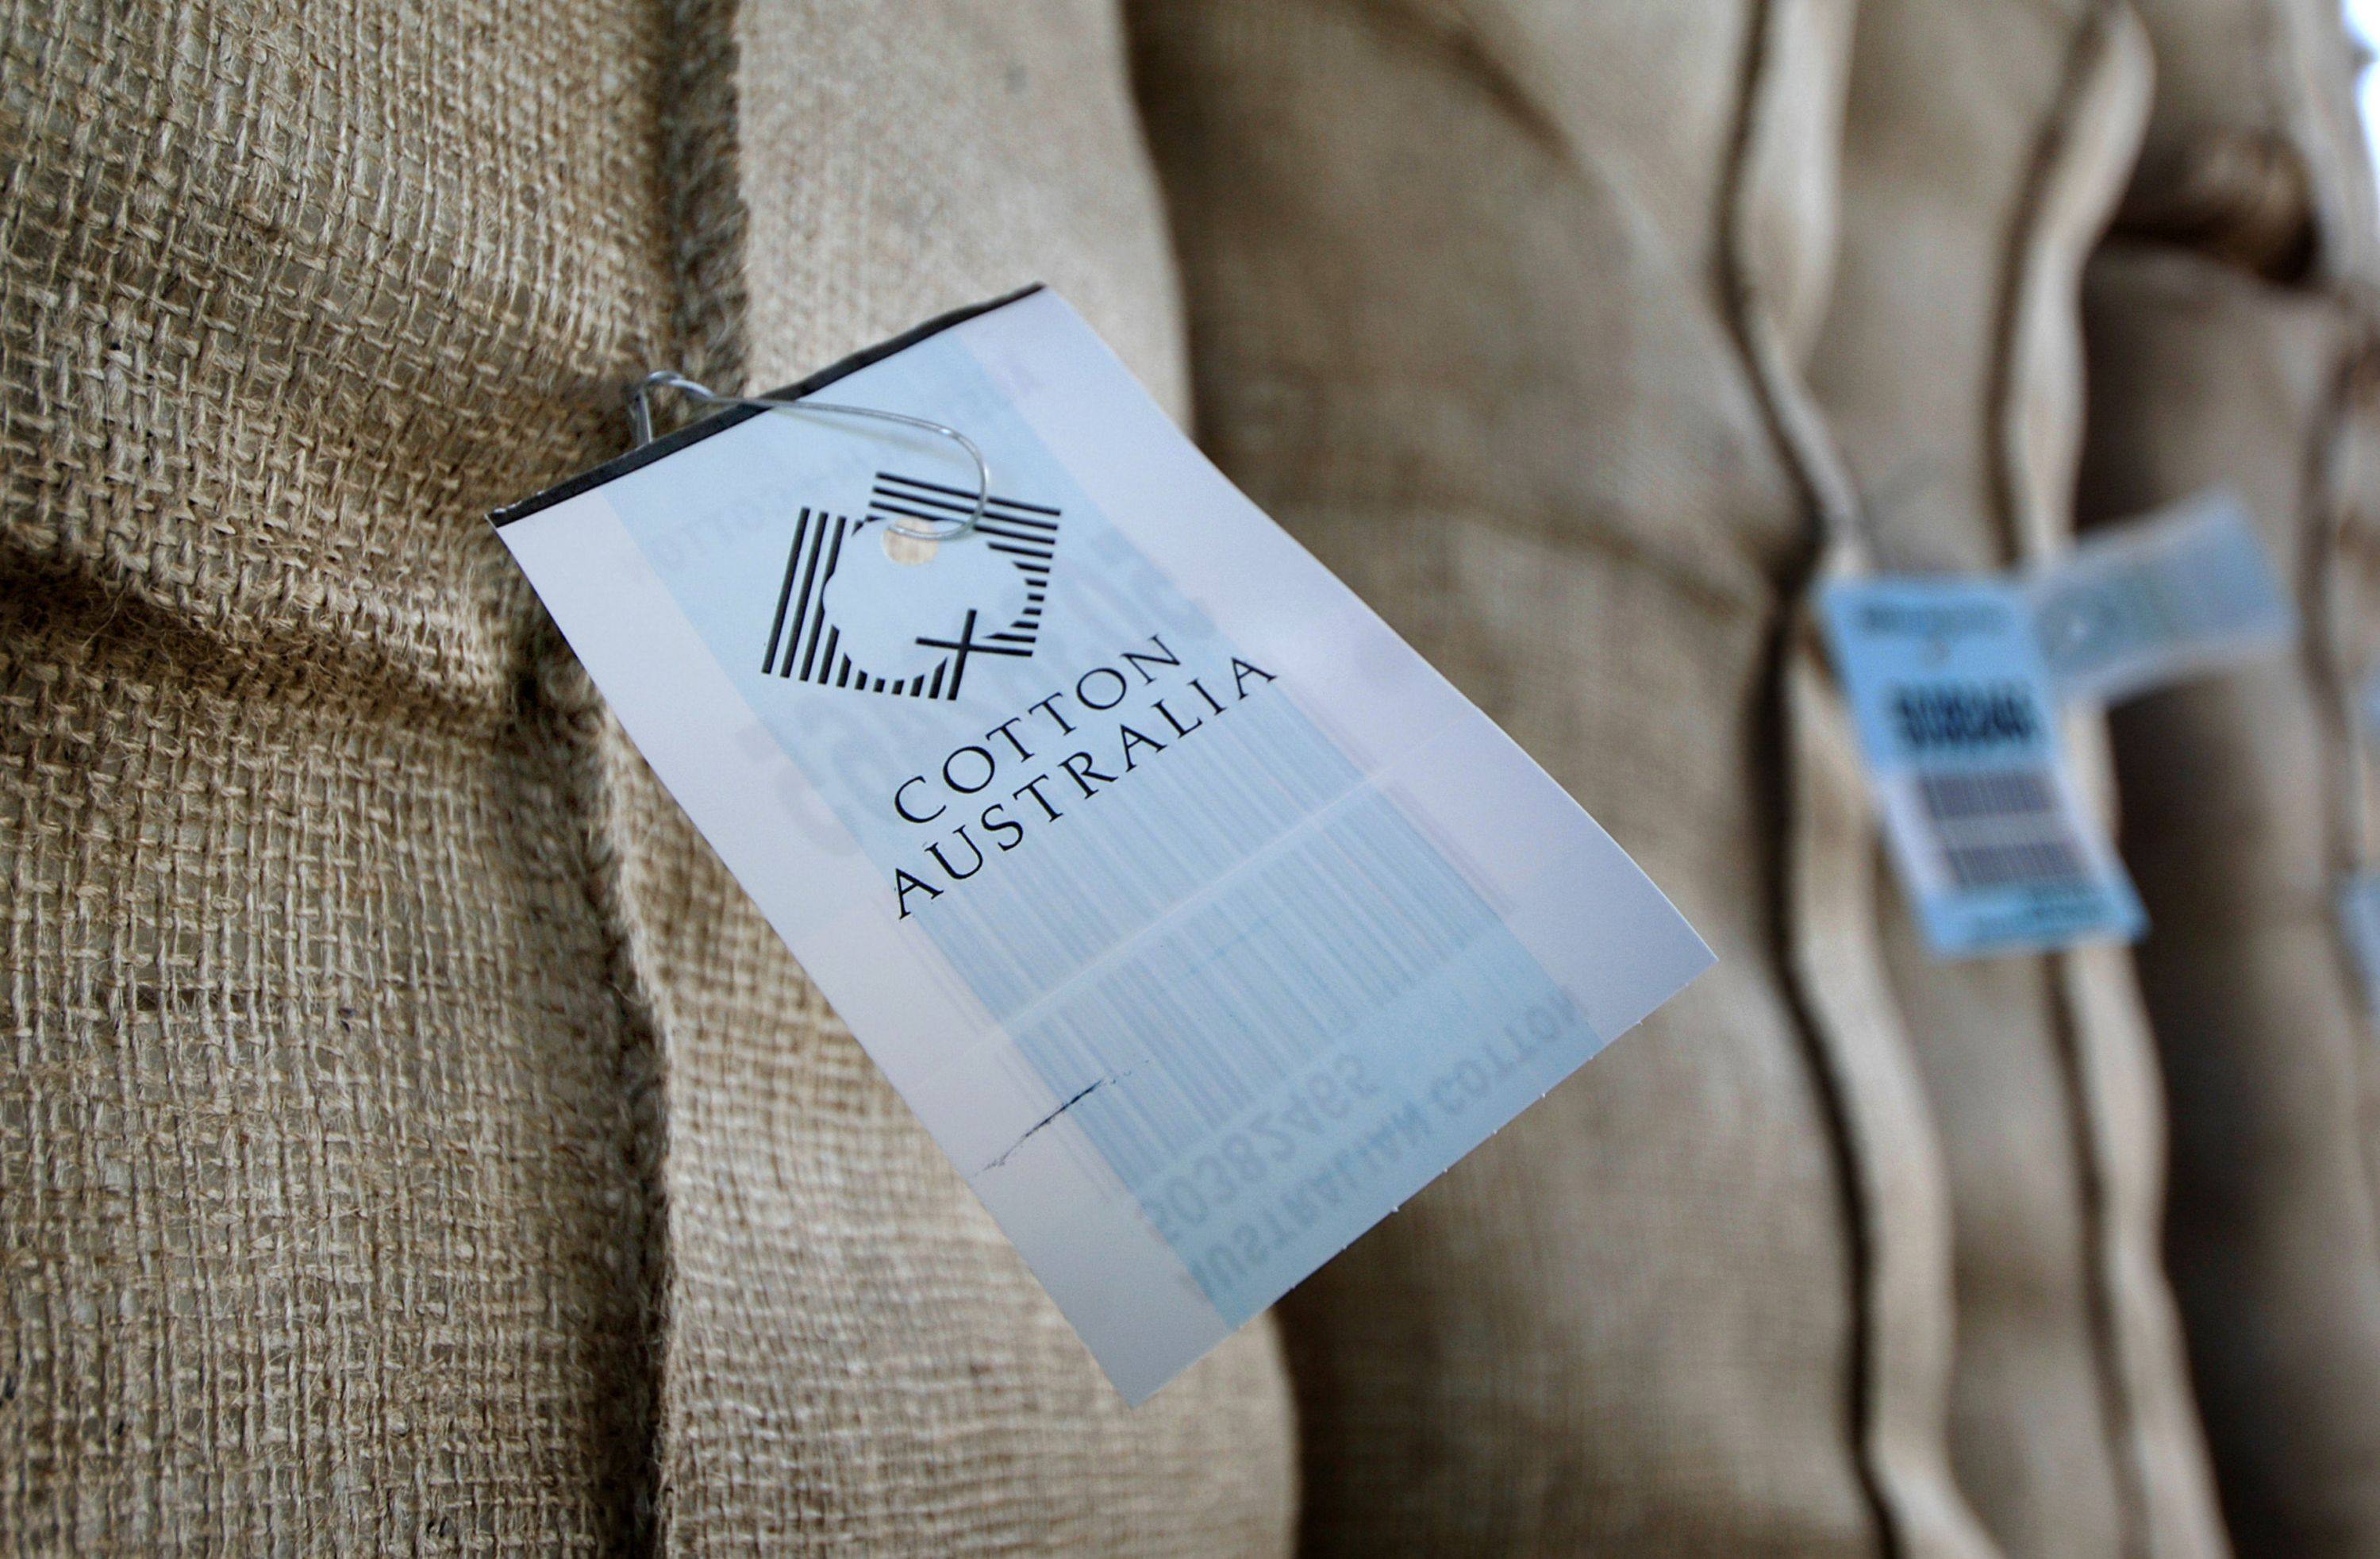 Australia is the world’s fifth-largest exporter of cotton. Photo: Bloomberg